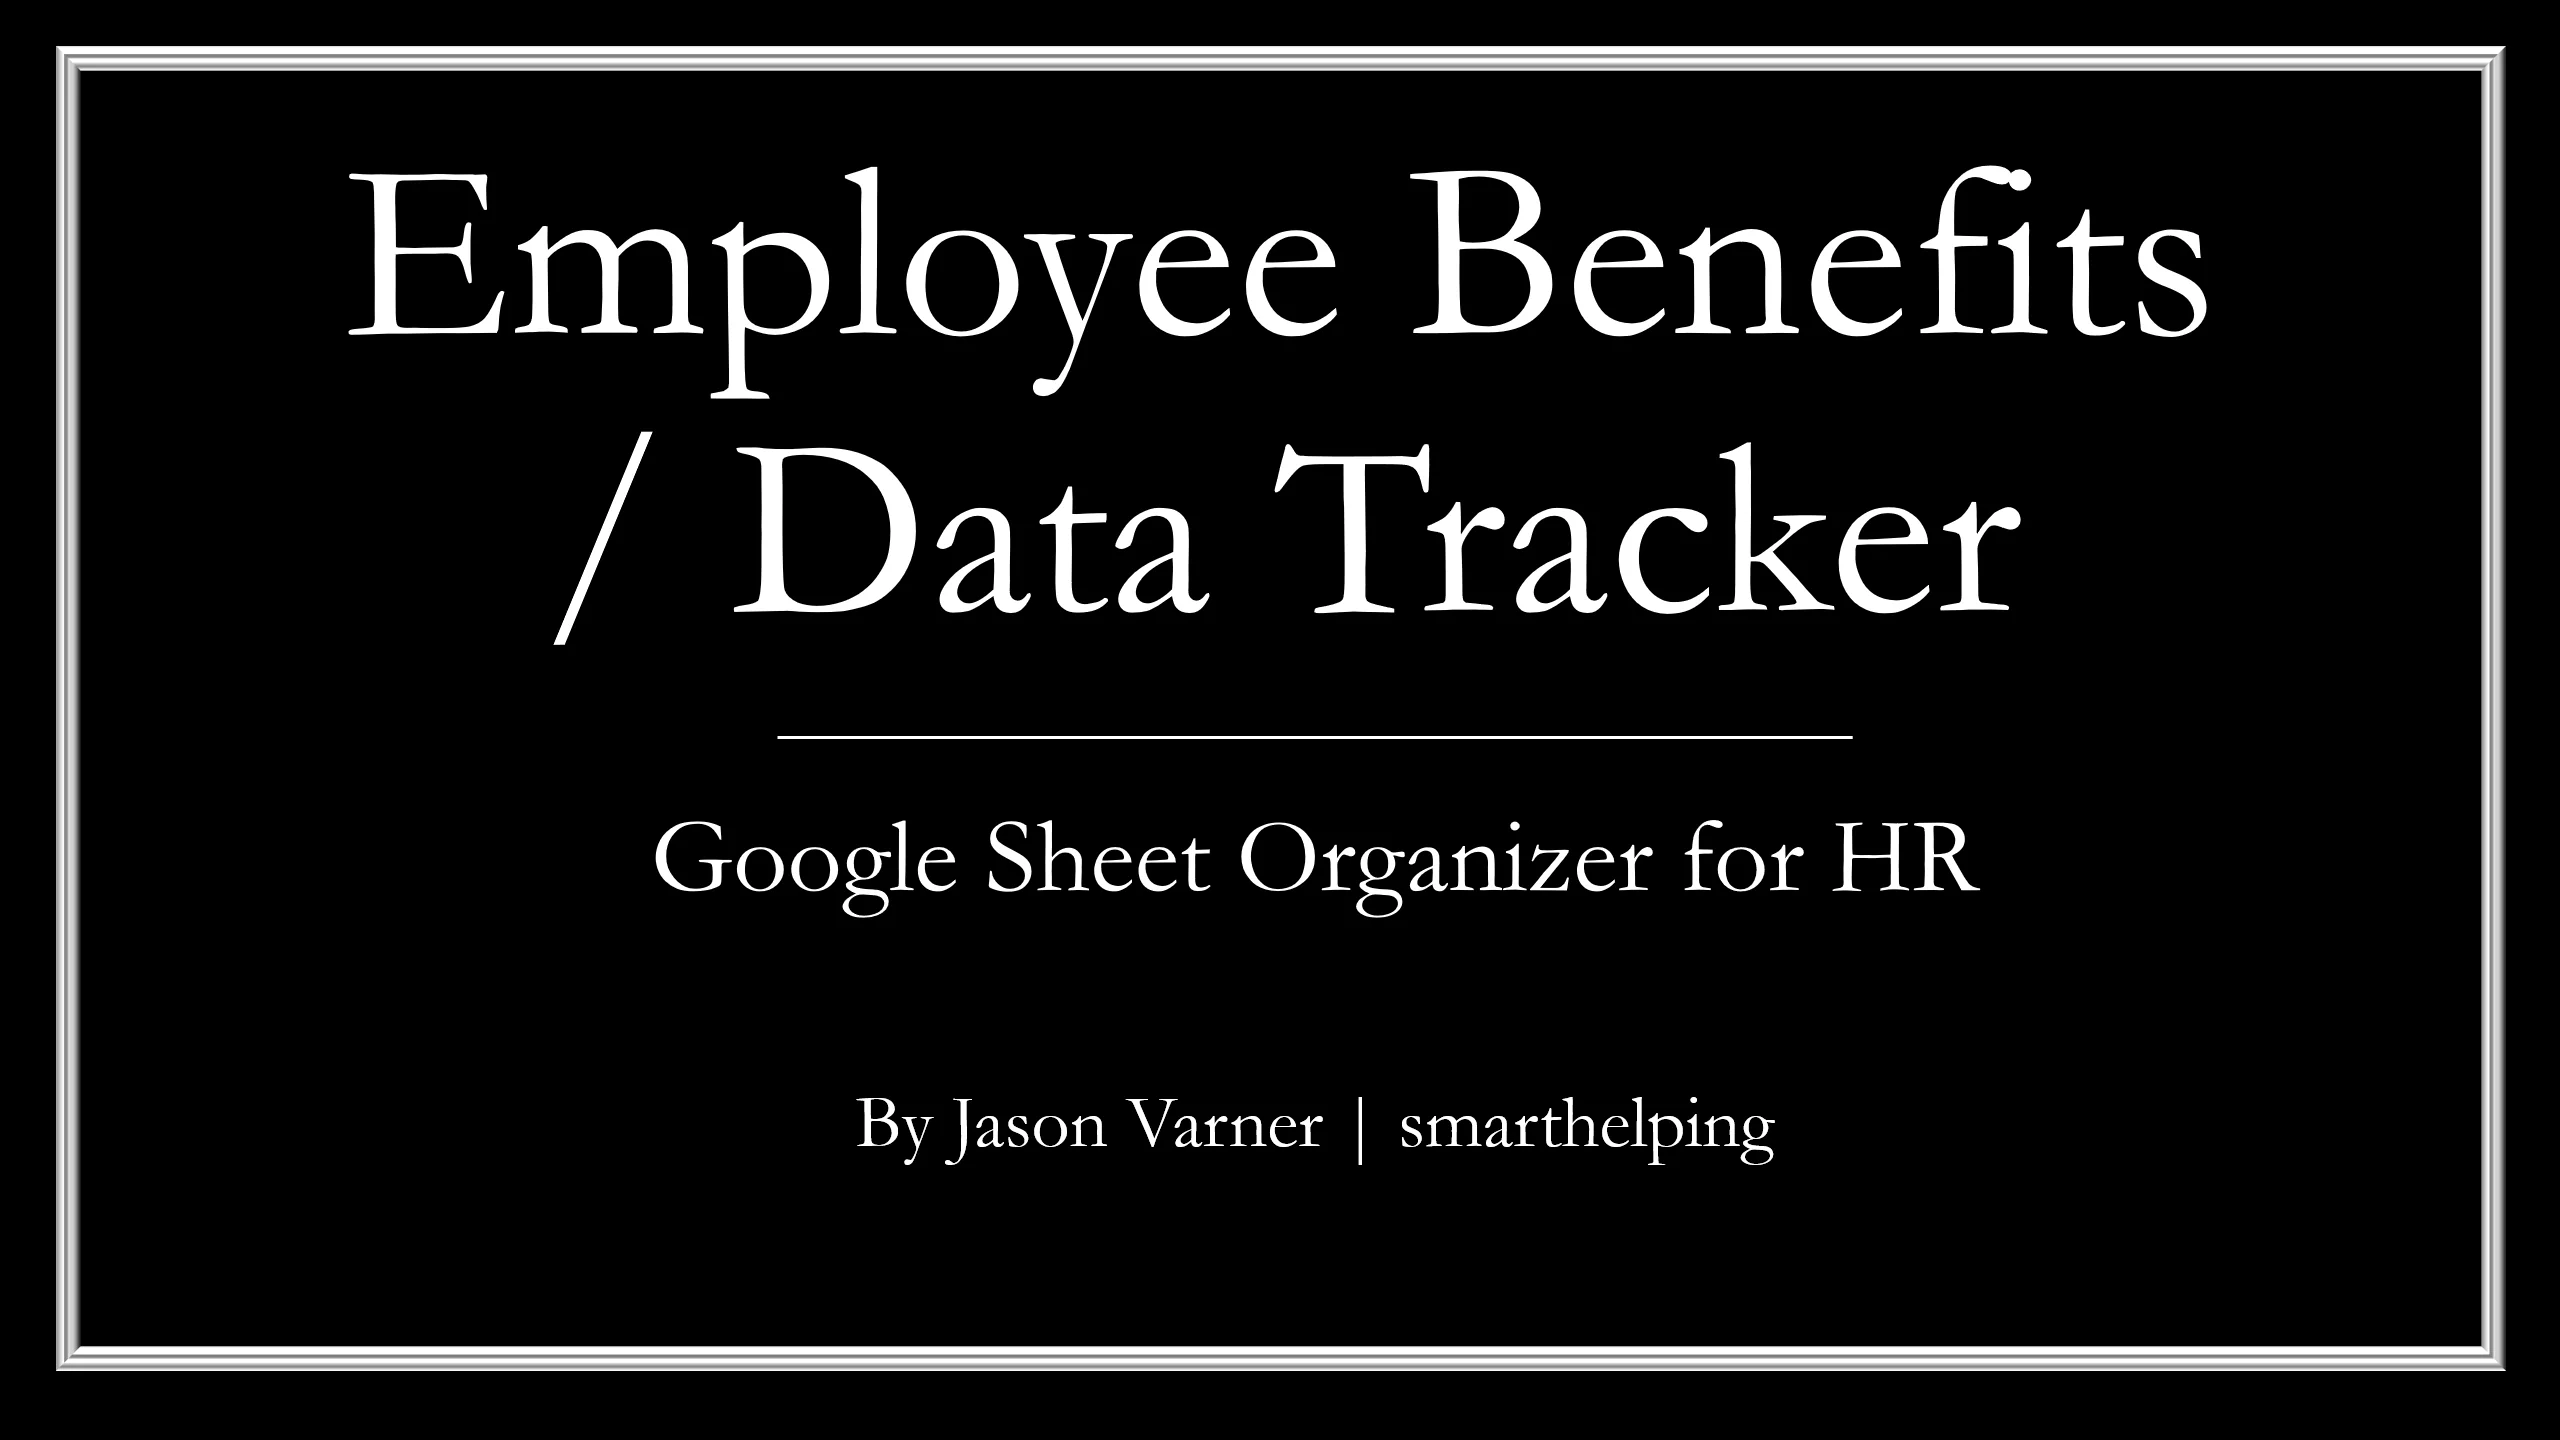 Employee Benefits Tracker (Google Sheet for HR Managers)